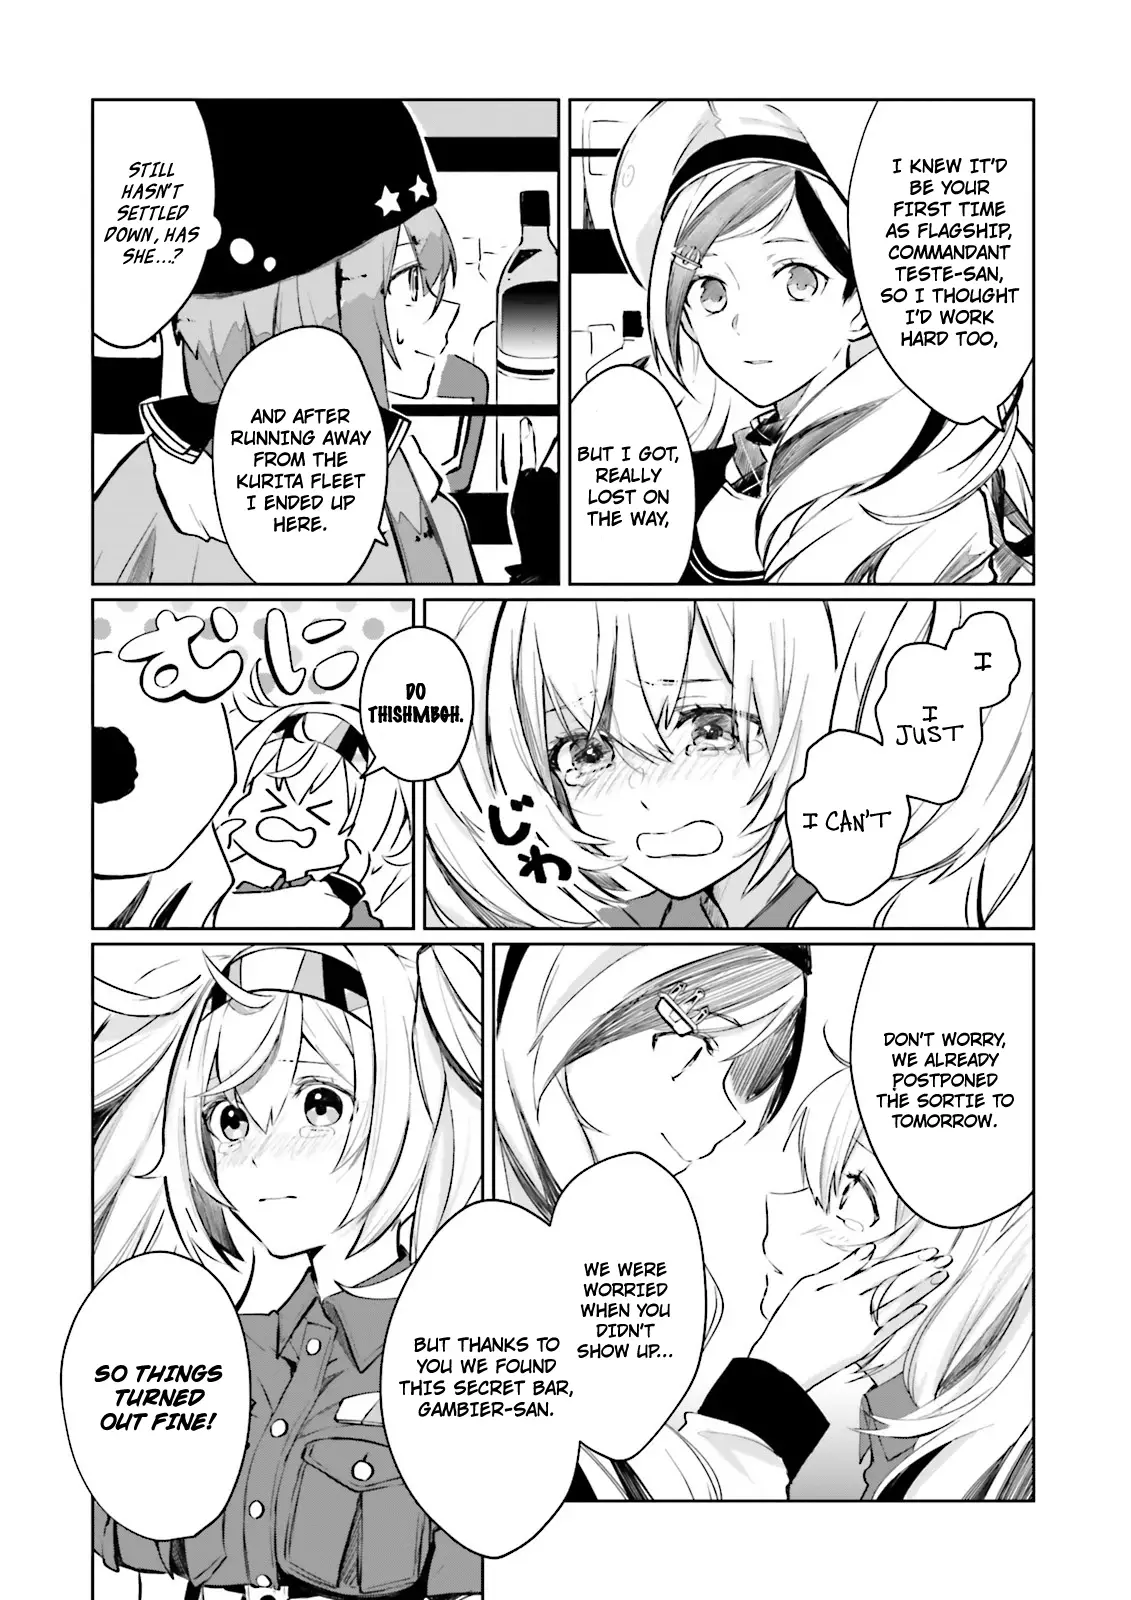 Kantai Collection -Kancolle- Tonight, Another "salute"! - 1 page 15